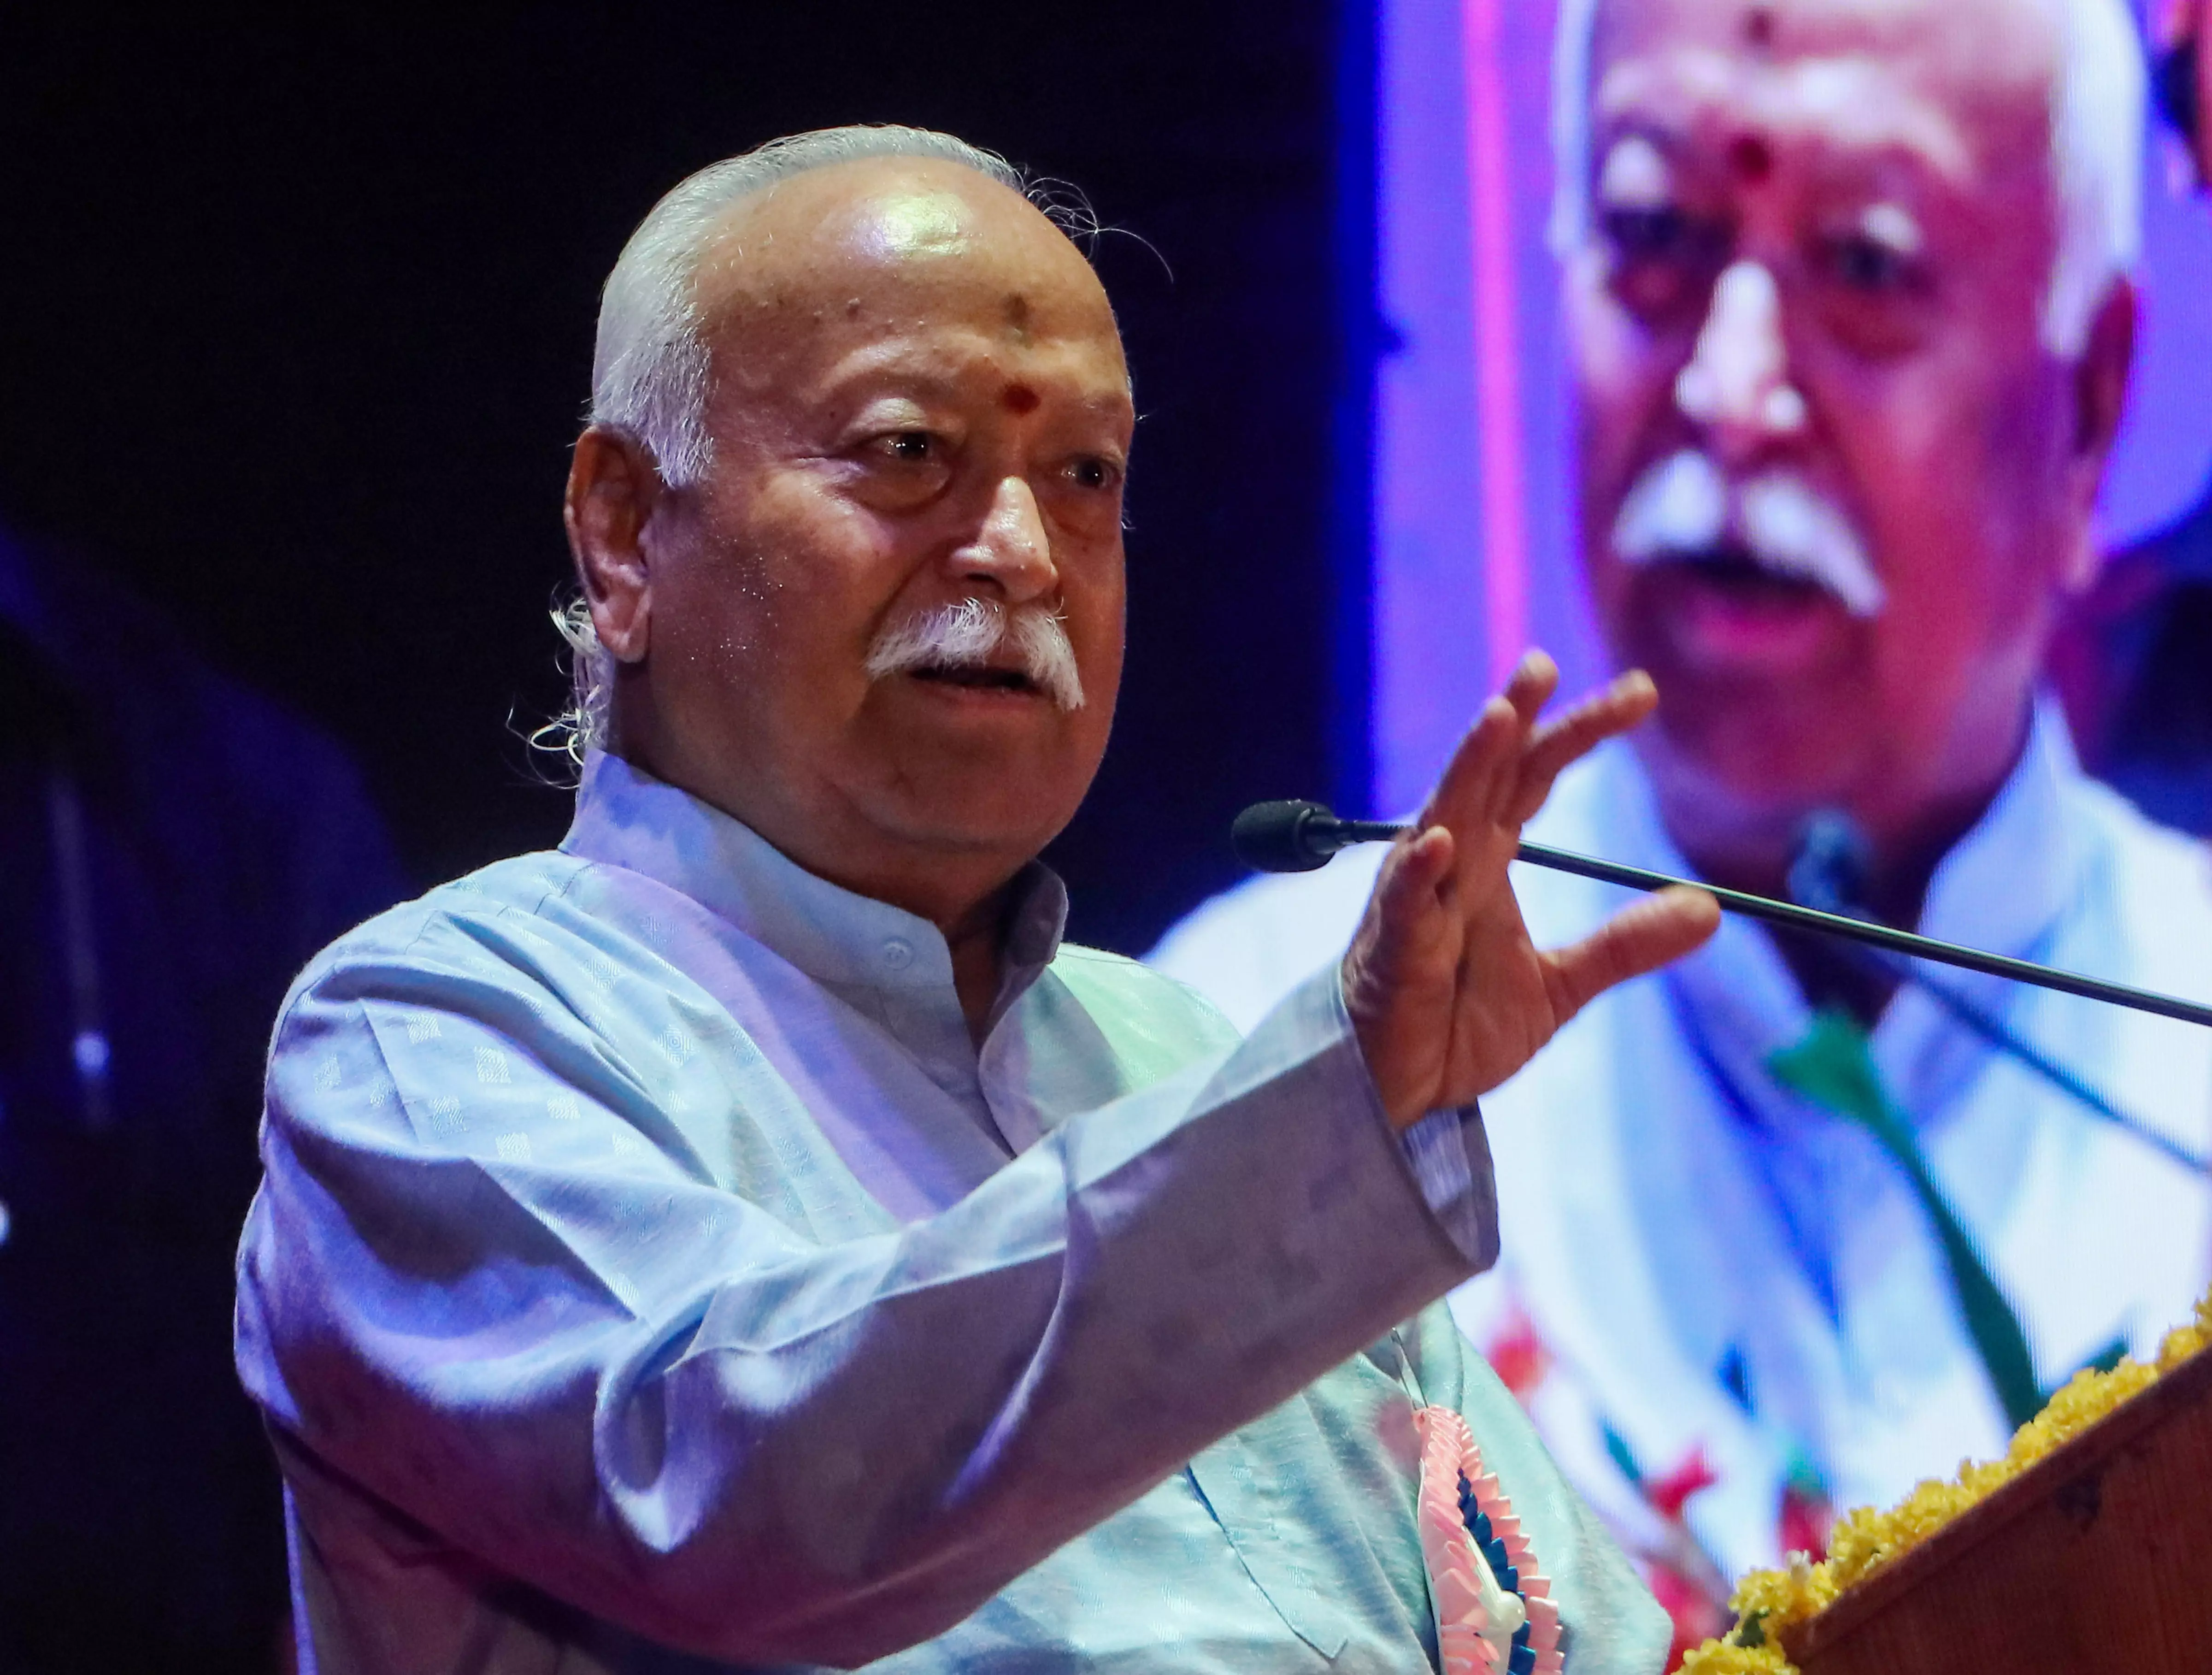 Connect with fellow Hindus and world; conquer hearts: RSS chief Mohan Bhagwat